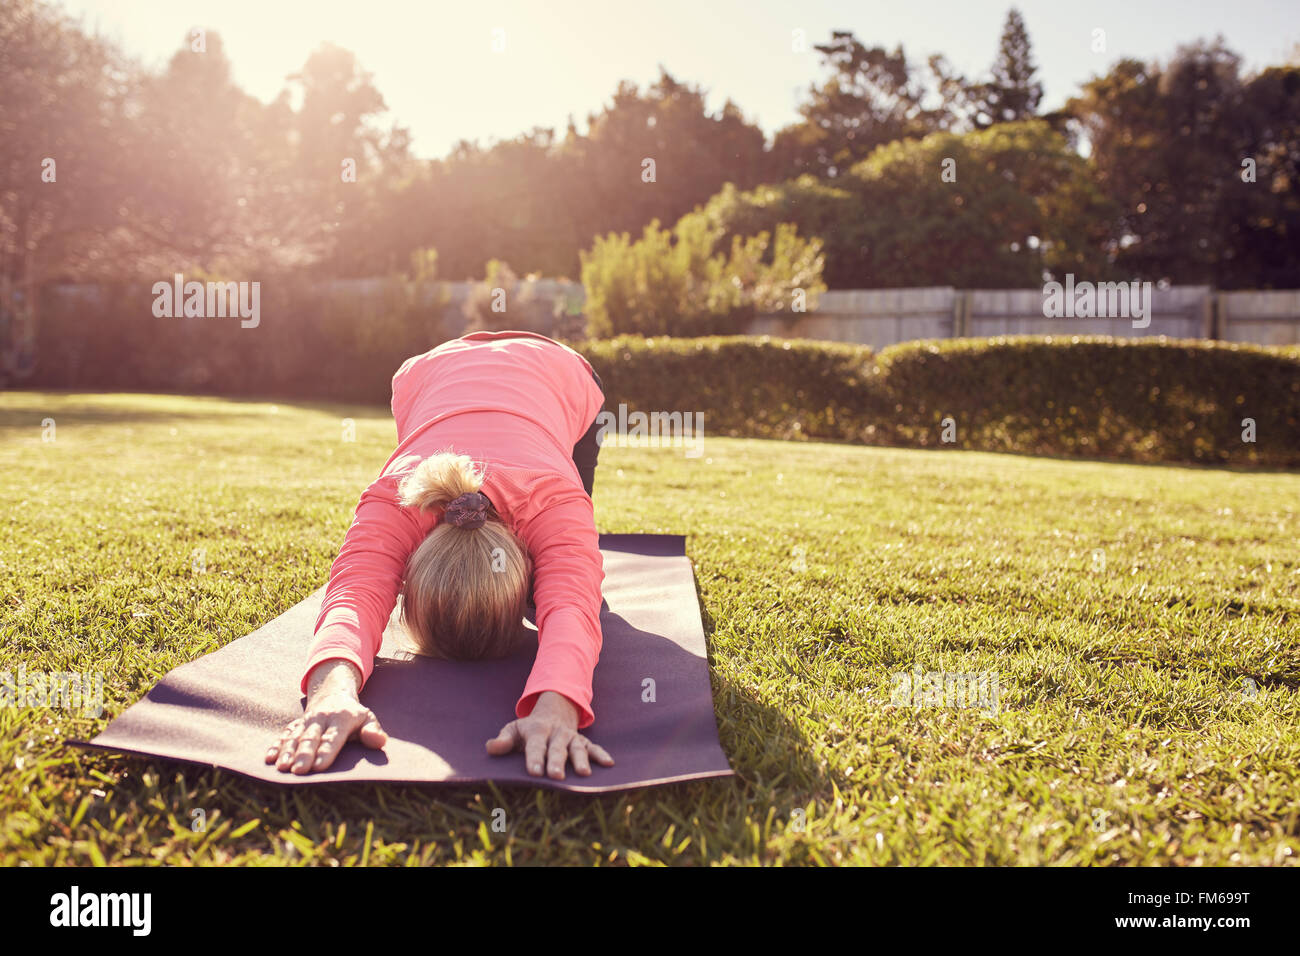 Woman in yoga pose on mat outdoors with sunflare Stock Photo